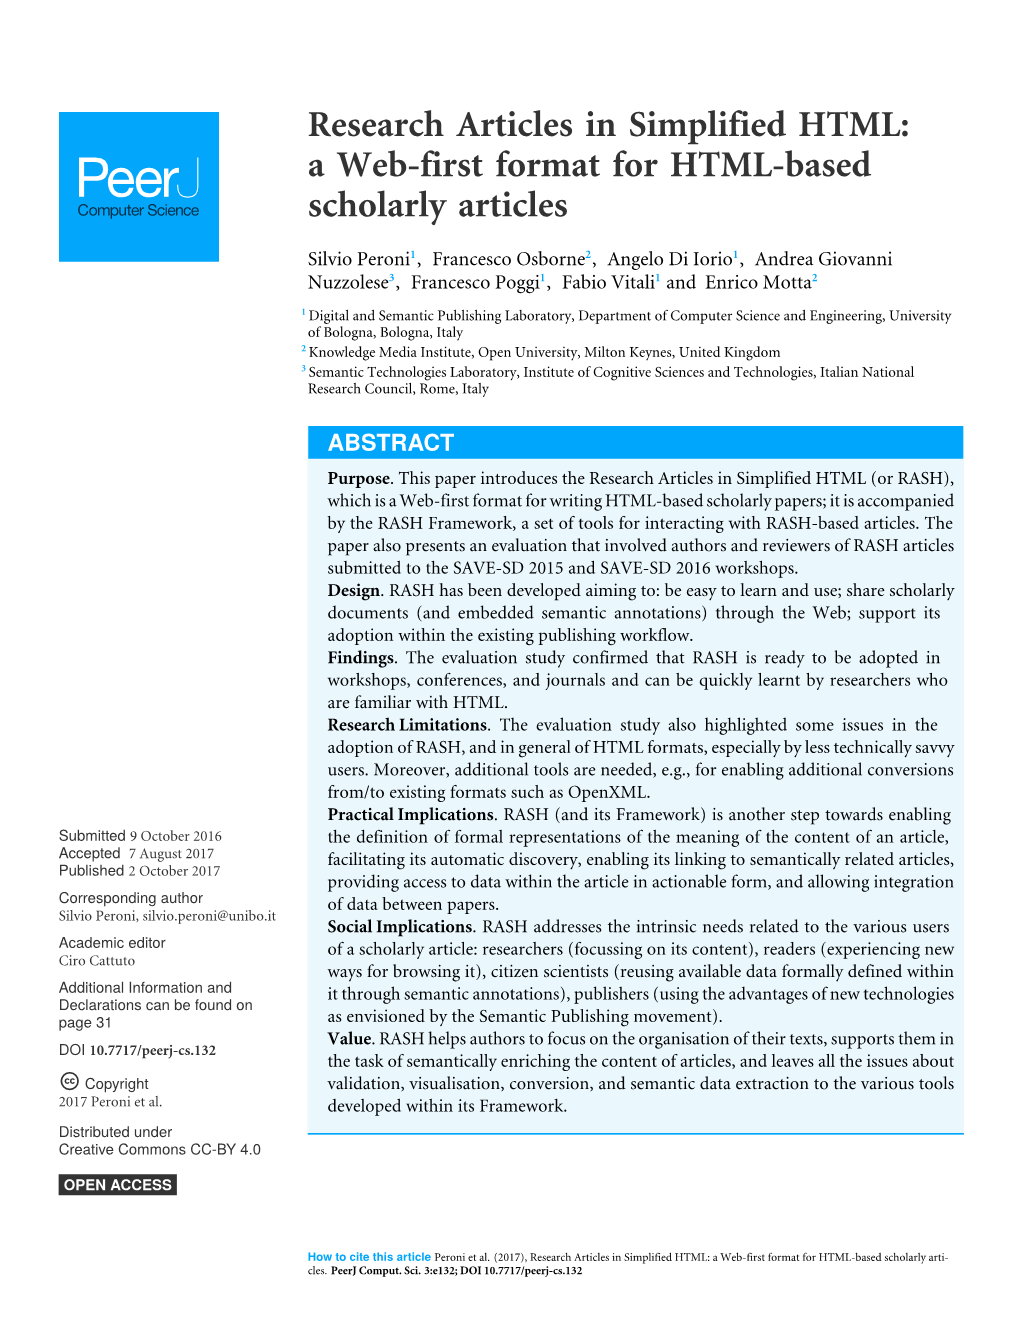 Research Articles in Simplified HTML: a Web-First Format for HTML-Based Scholarly Articles